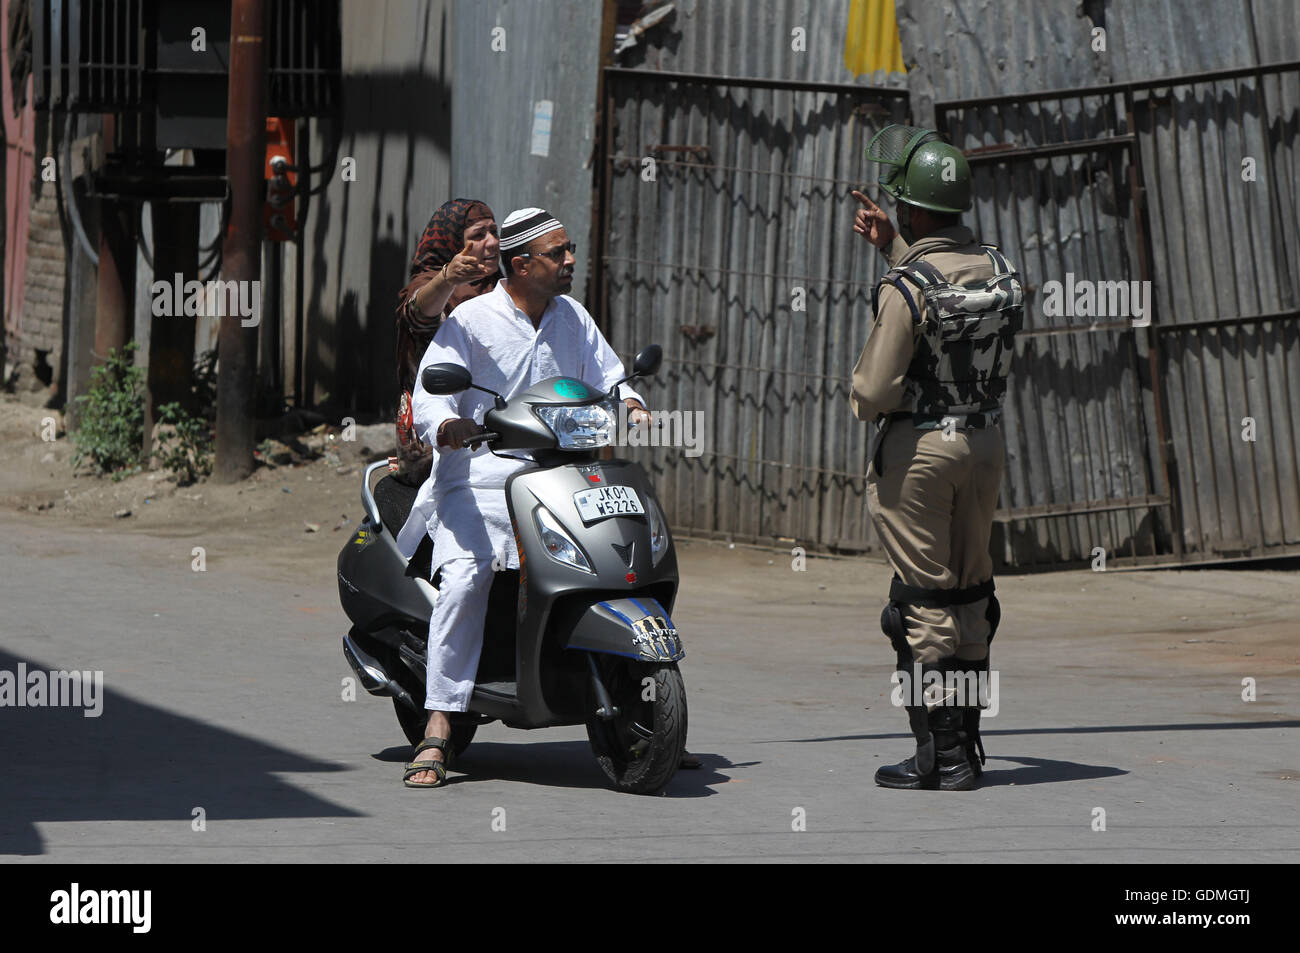 Srinagar, Indian-controlled Kashmir. 19th July, 2016. An Indian paramilitary trooper stops a scooterist and a woman during a curfew in Srinagar, summer capital of Indian-controlled Kashmir, July 19, 2016. Protests have been held in Kashmir since July 9 over the killing of Burhan Wani, a top figure in the pro-independence Hizbul Mujahideen group. Credit:  Javed Dar/Xinhua/Alamy Live News Stock Photo